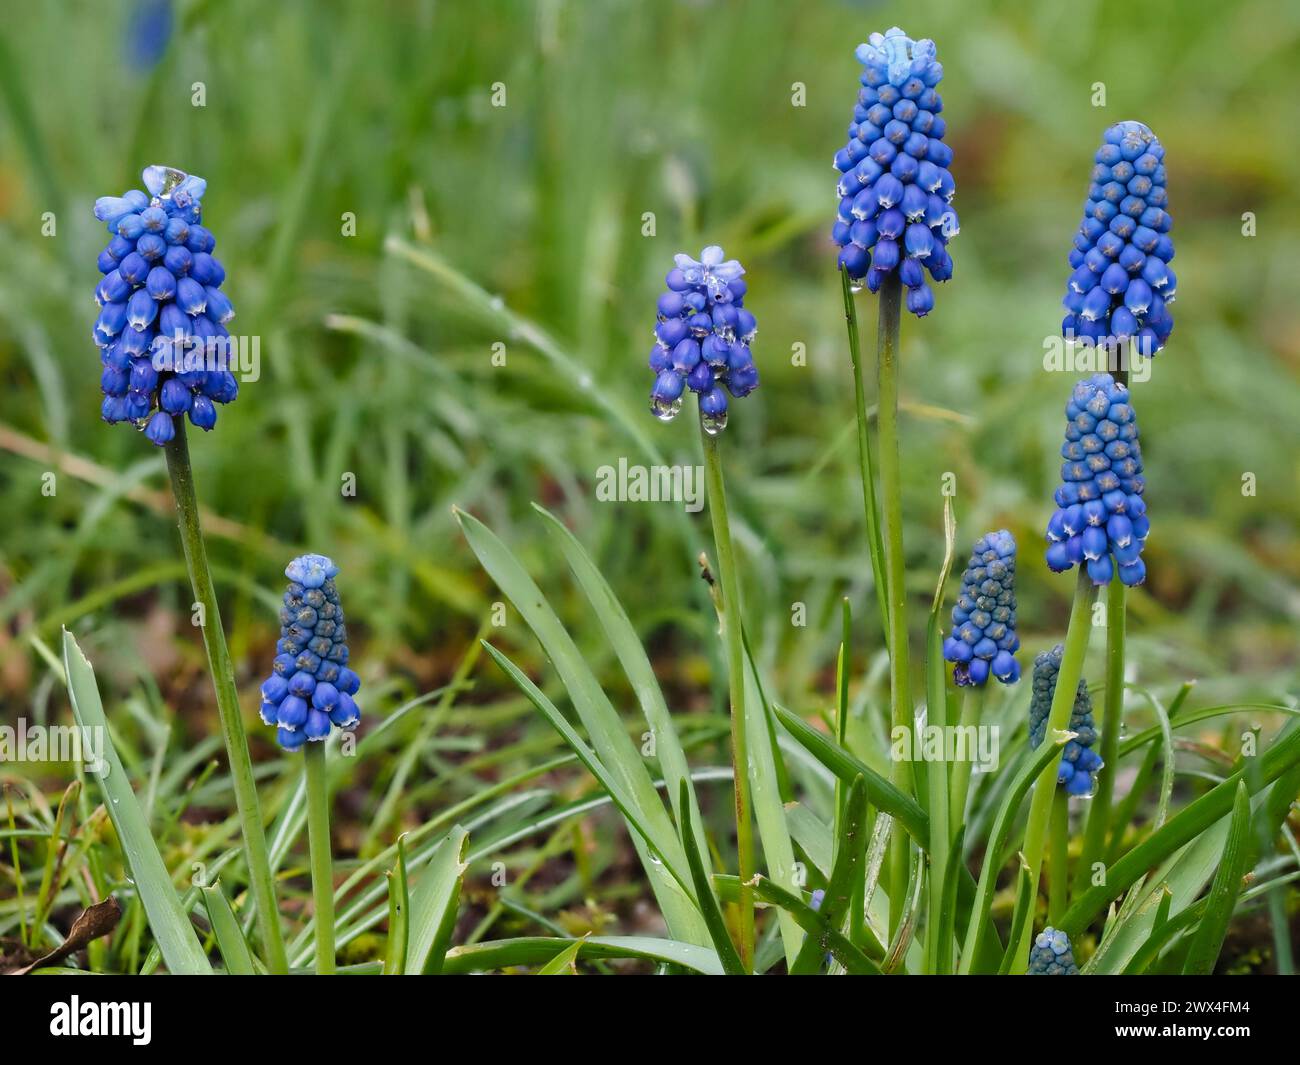 white lipped blue flowers in the racemes of the hardy, early spring flowering bulb, Muscari atlanticum Stock Photo